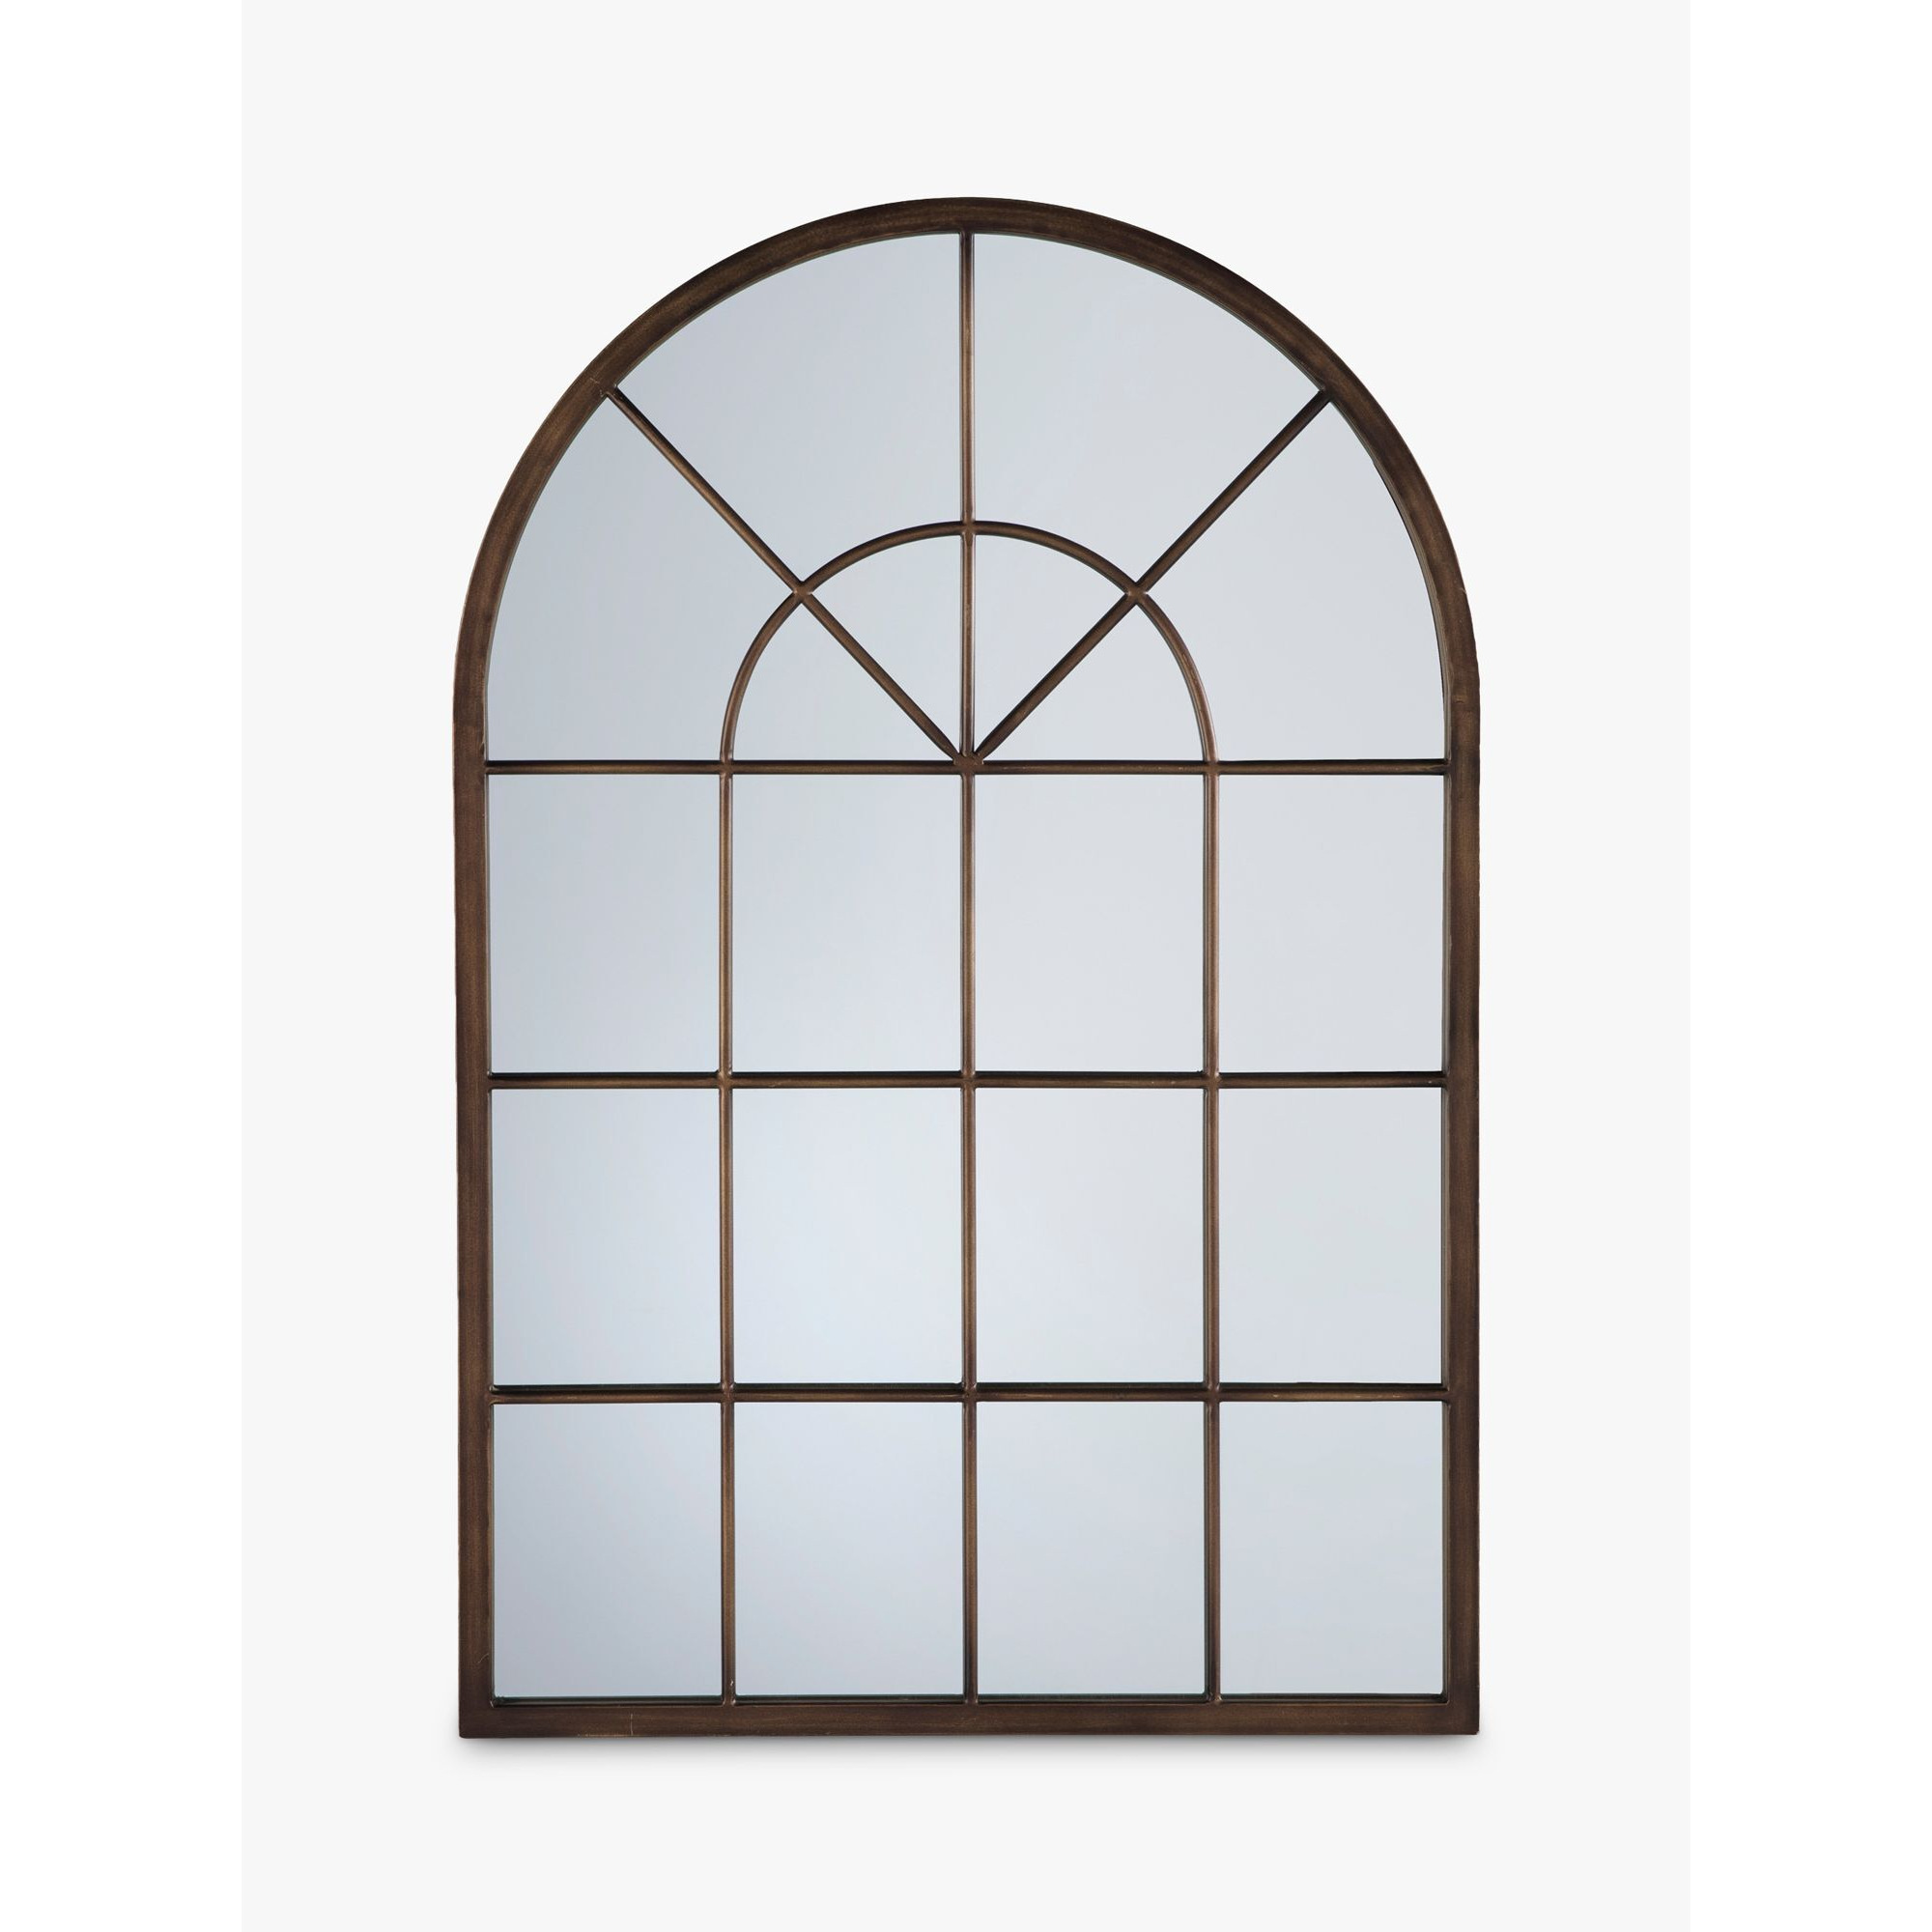 Gallery Direct Carmel Arched Metal Frame Window Wall Mirror, 90 x 60cm - image 1